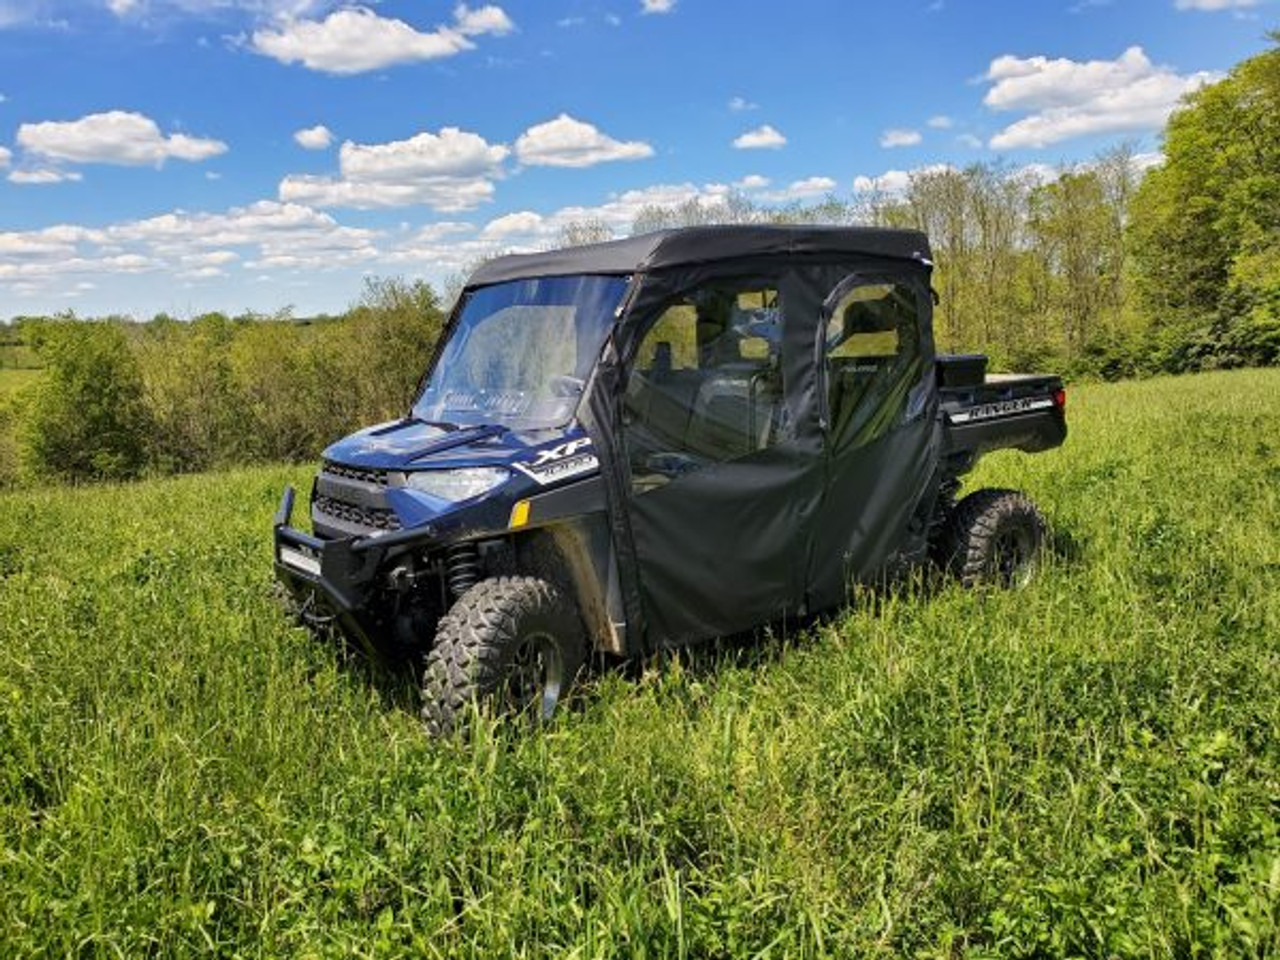 3 Star side x side Polaris Ranger Crew 1000/XP1000 soft doors front and side angle view